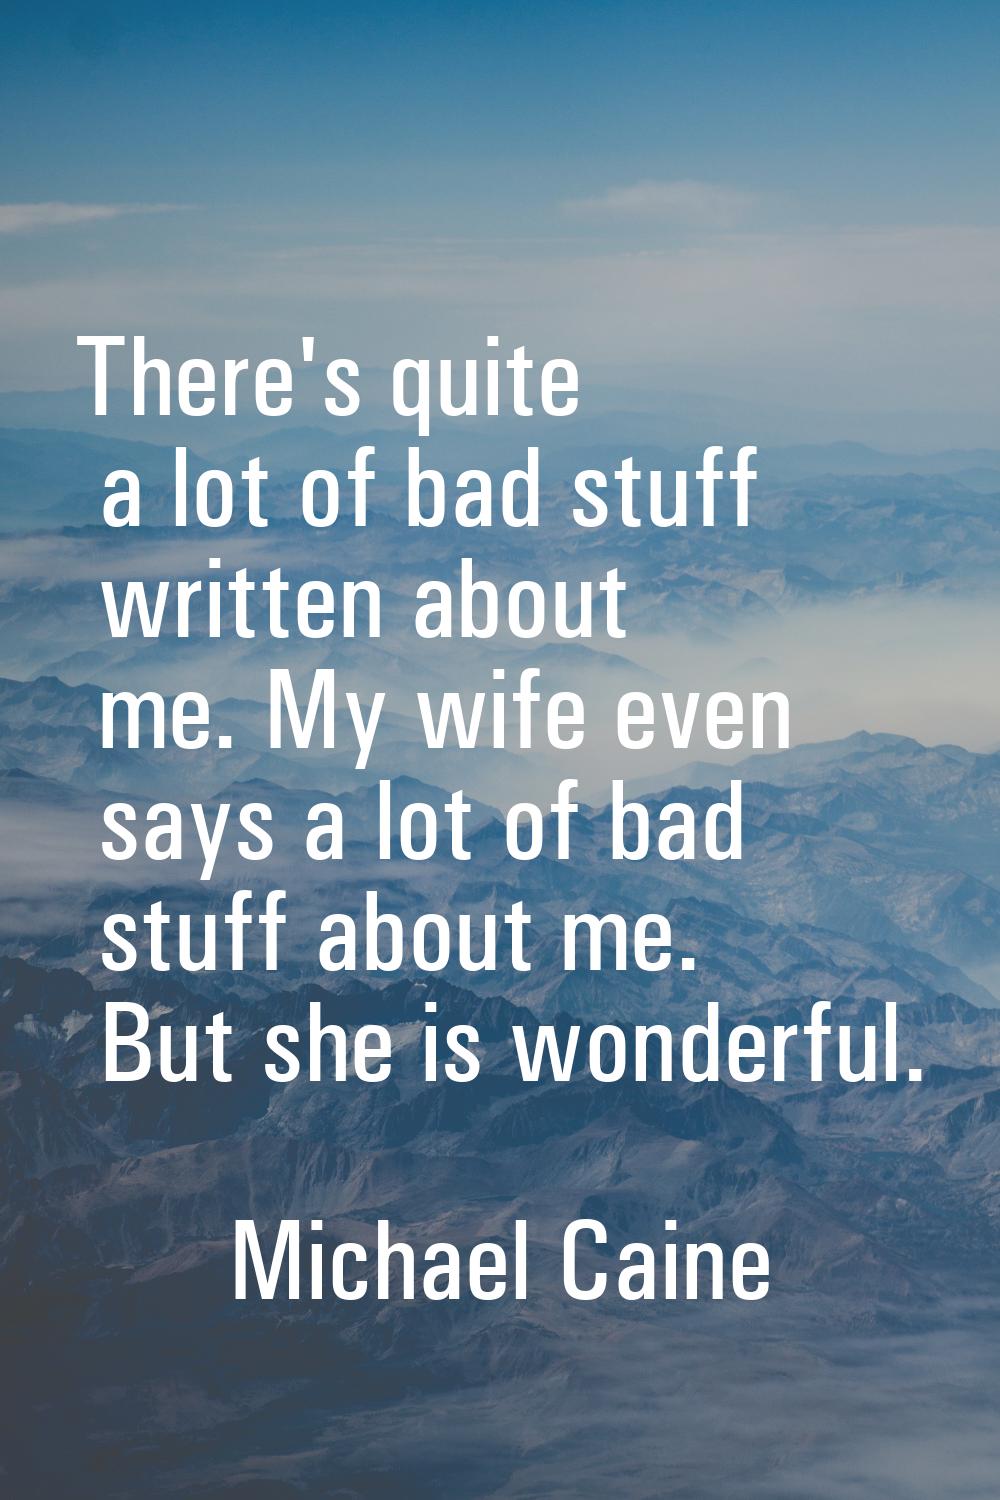 There's quite a lot of bad stuff written about me. My wife even says a lot of bad stuff about me. B